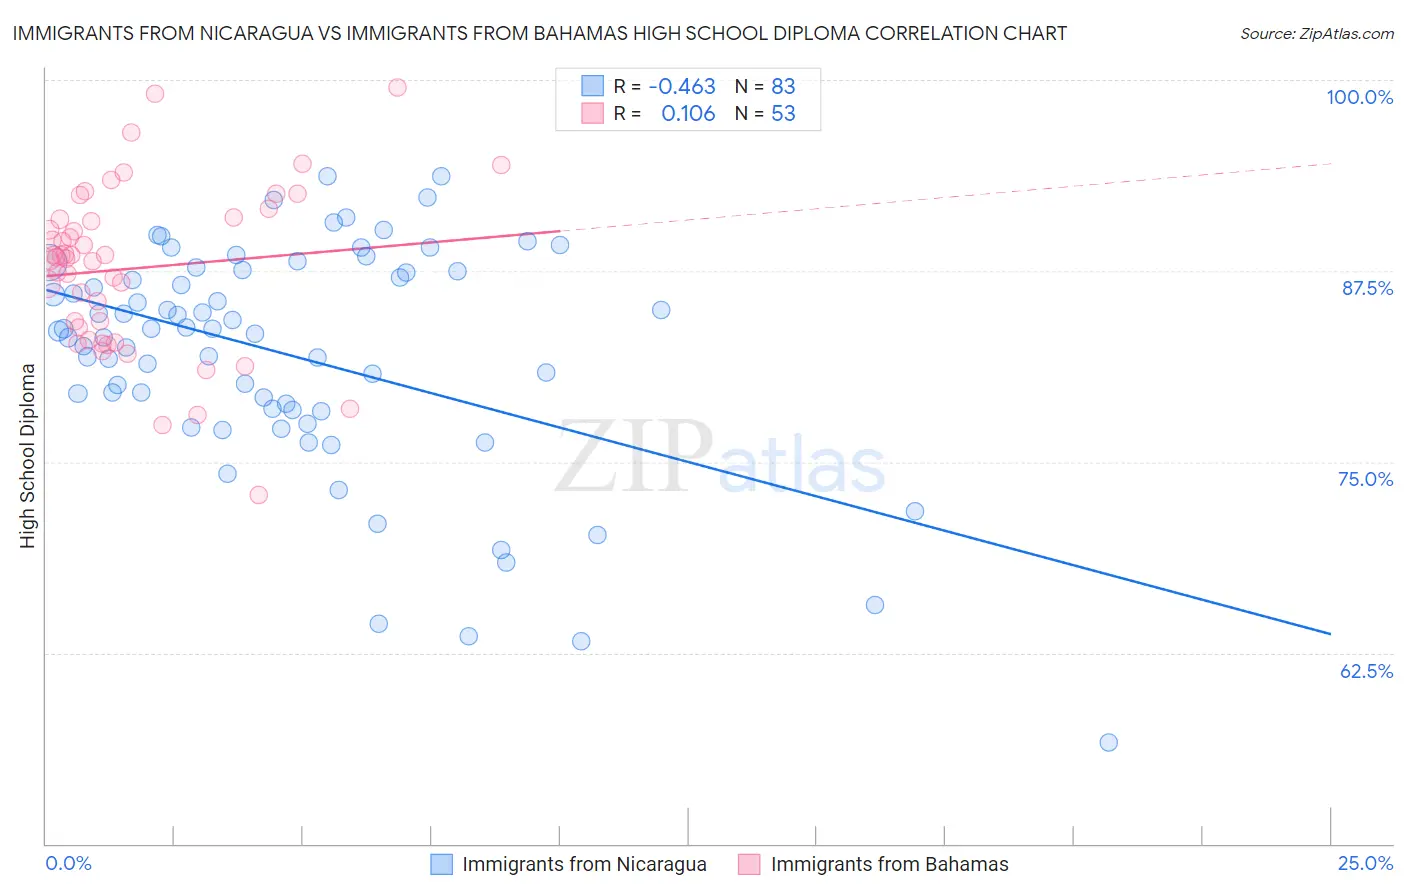 Immigrants from Nicaragua vs Immigrants from Bahamas High School Diploma